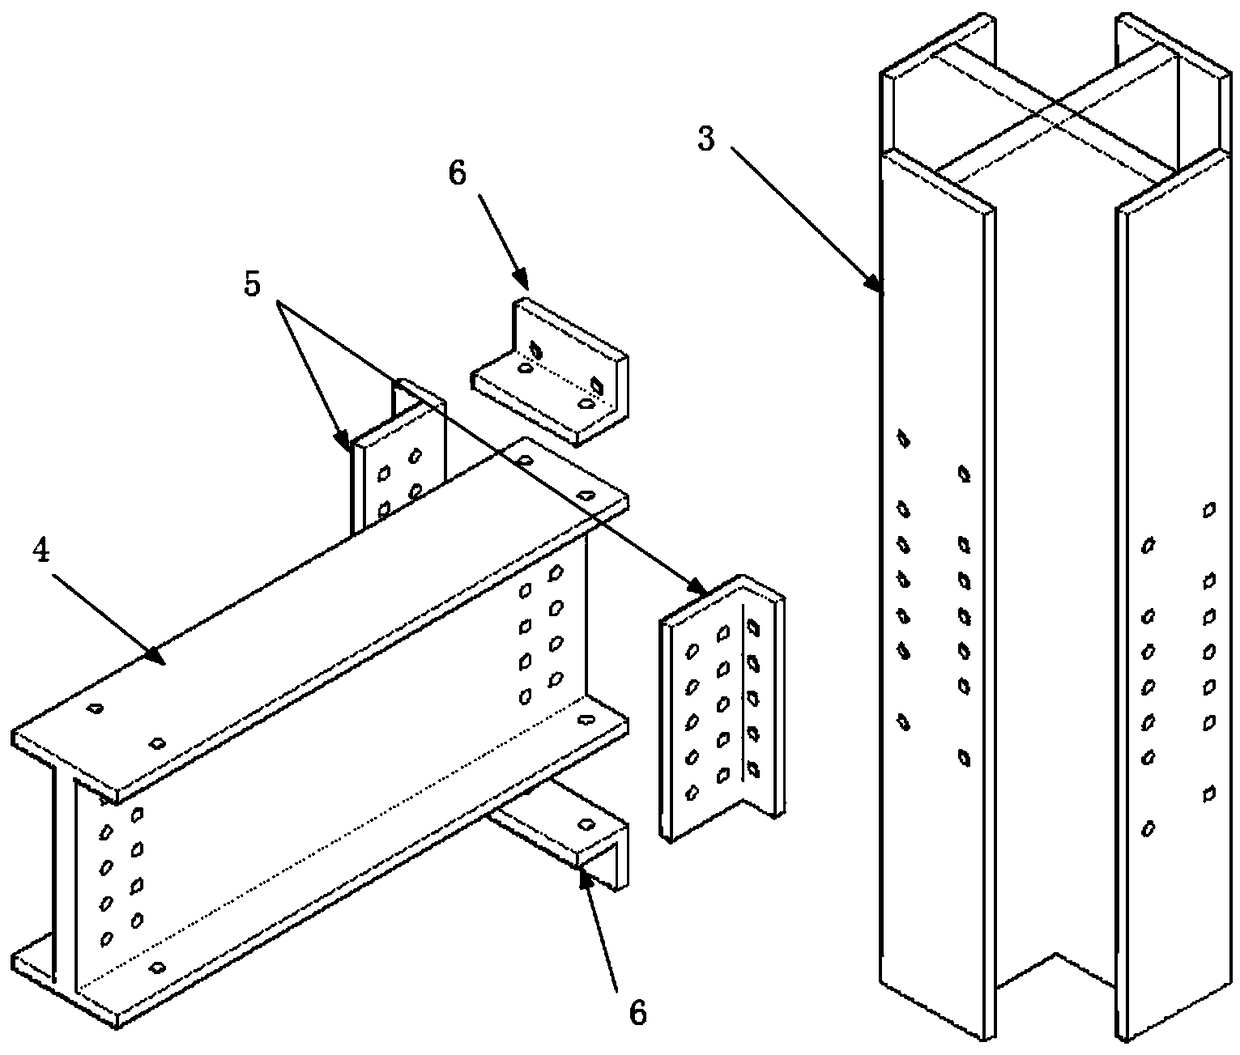 Assembling multi-section beam center support steel frame capable of self-centering after earthquake